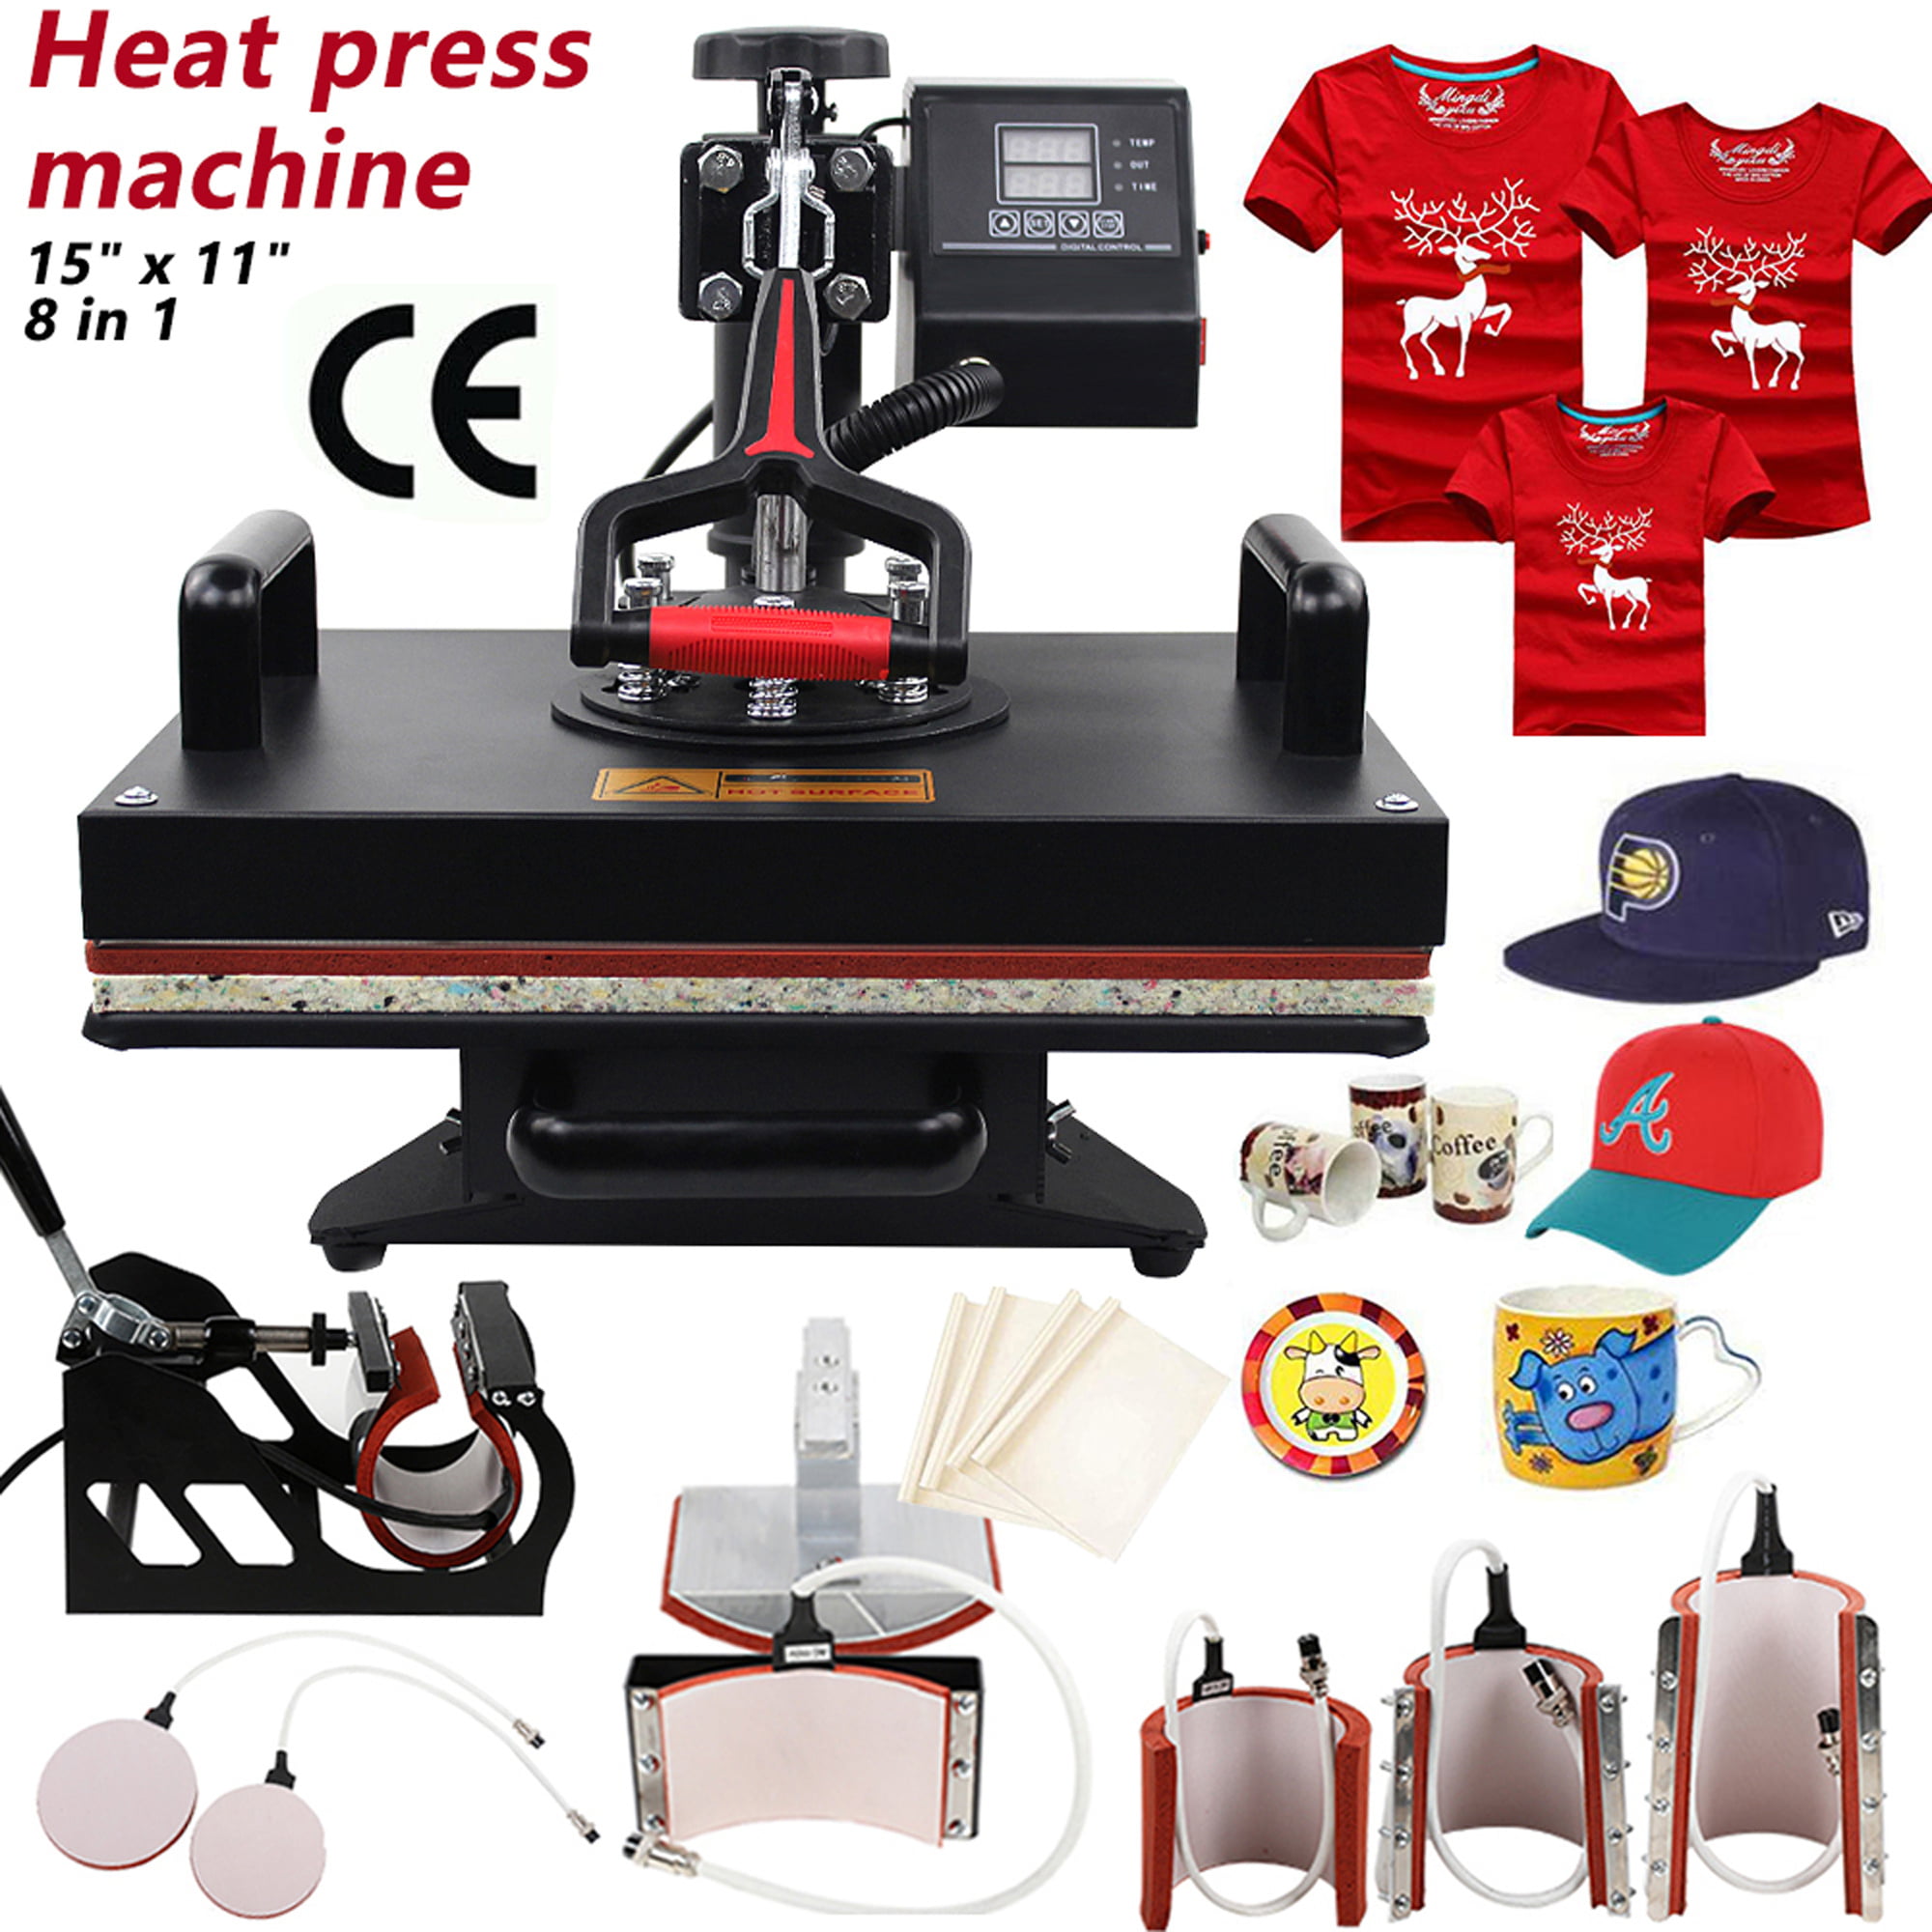 8 in 1 Heat Press Machine For T-Shirt 15"x15" Combo Kit Sublimation Swing Away_A 